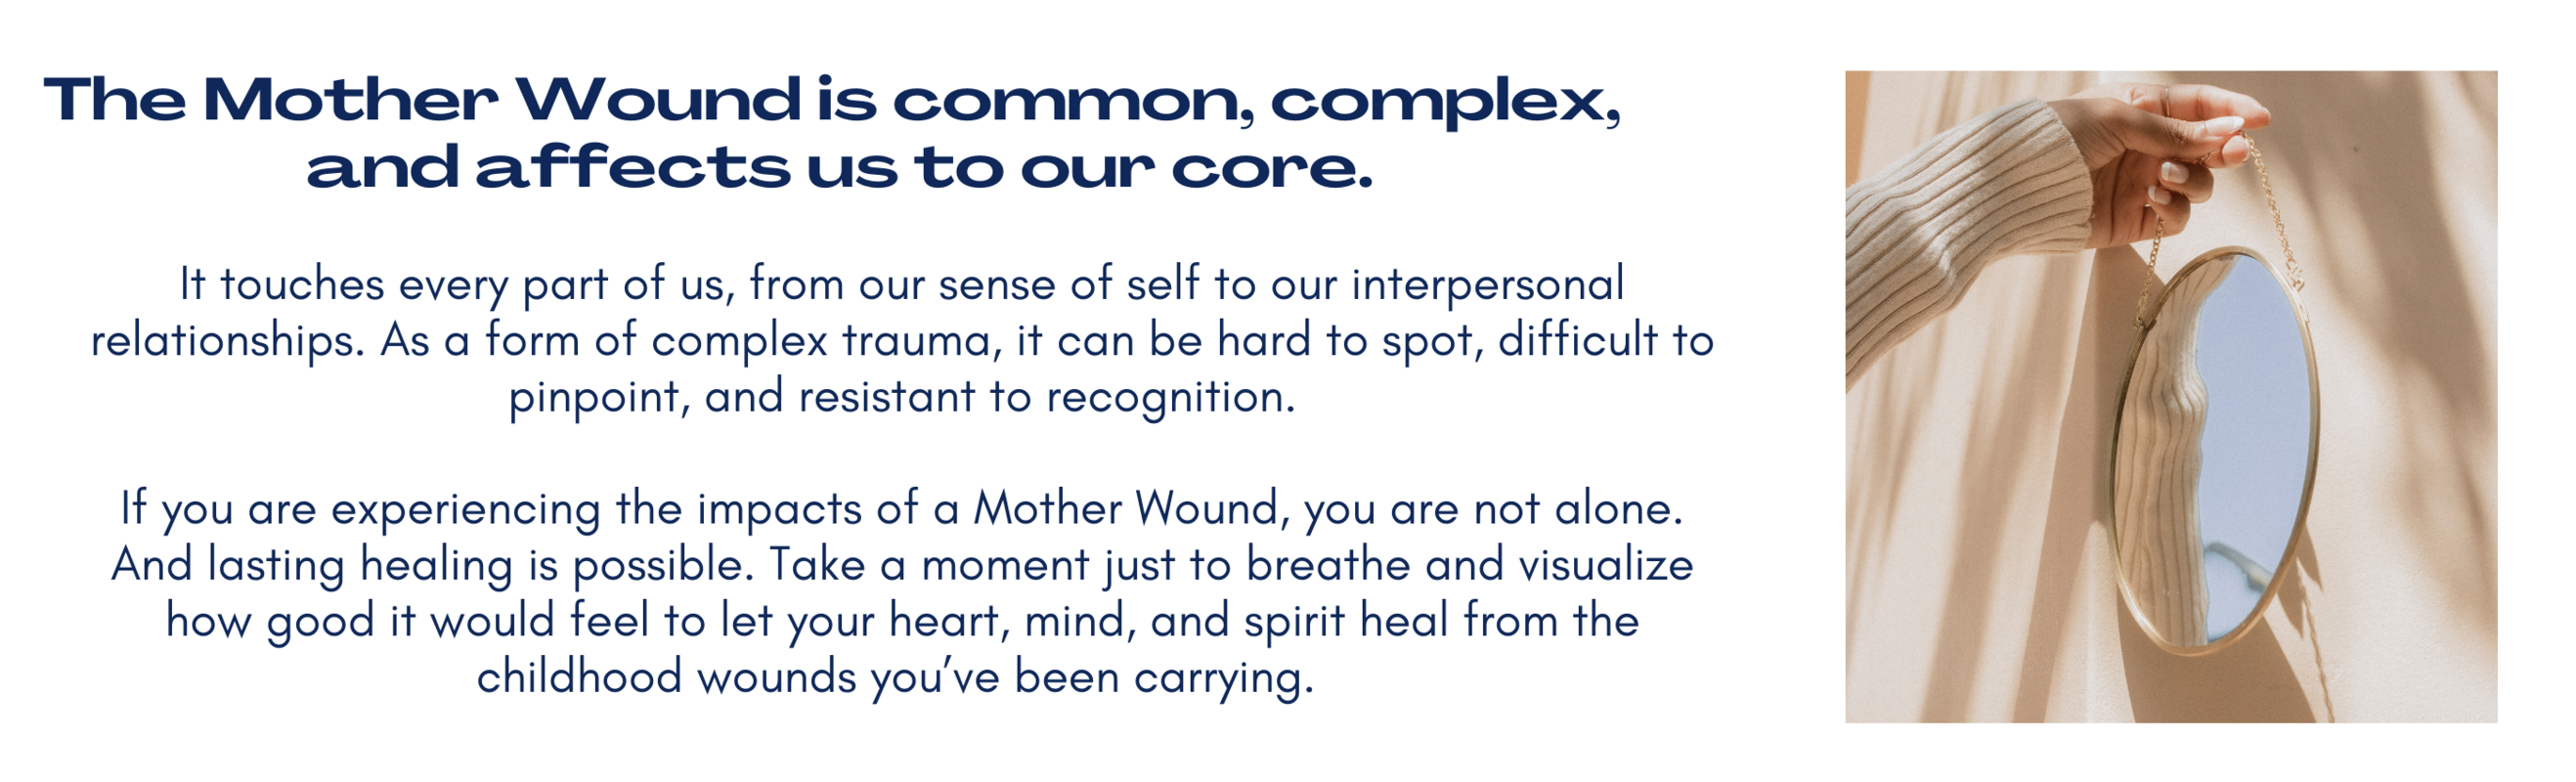 The Mother Wound is common, complex, and affects us to our core